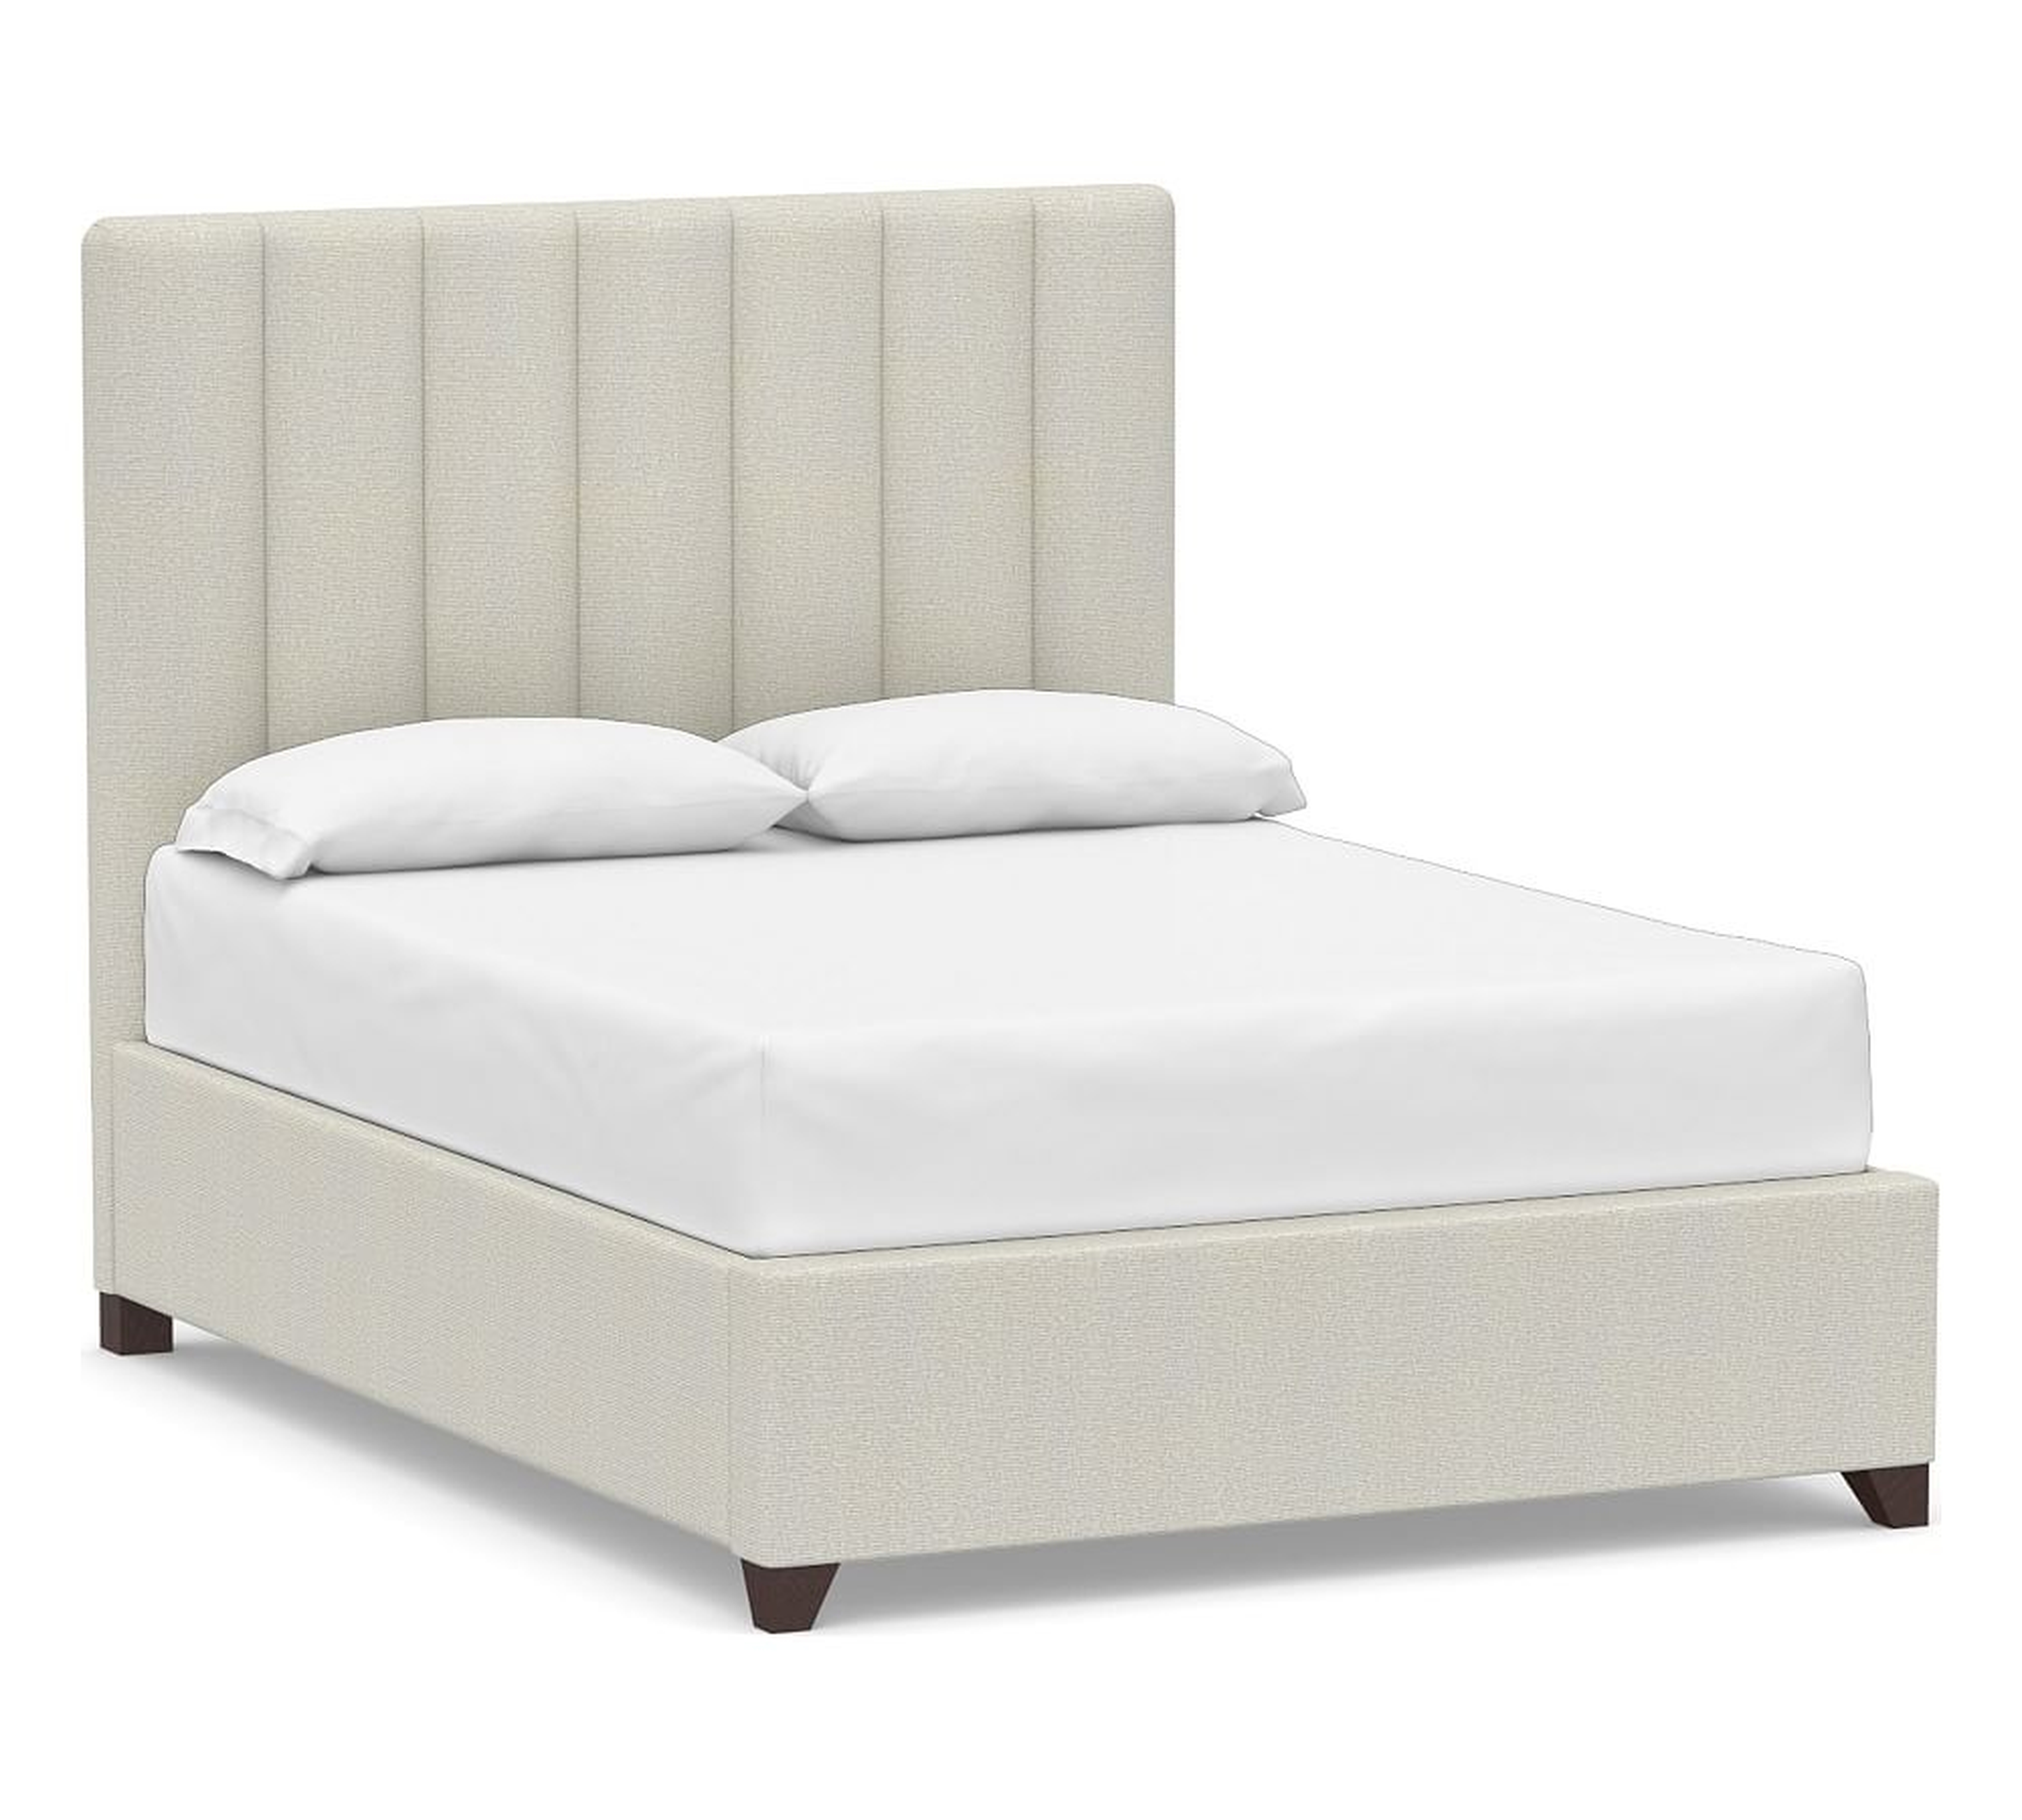 Kira Channel Tufted Upholstered Bed, California King, Performance Heathered Basketweave Dove - Pottery Barn